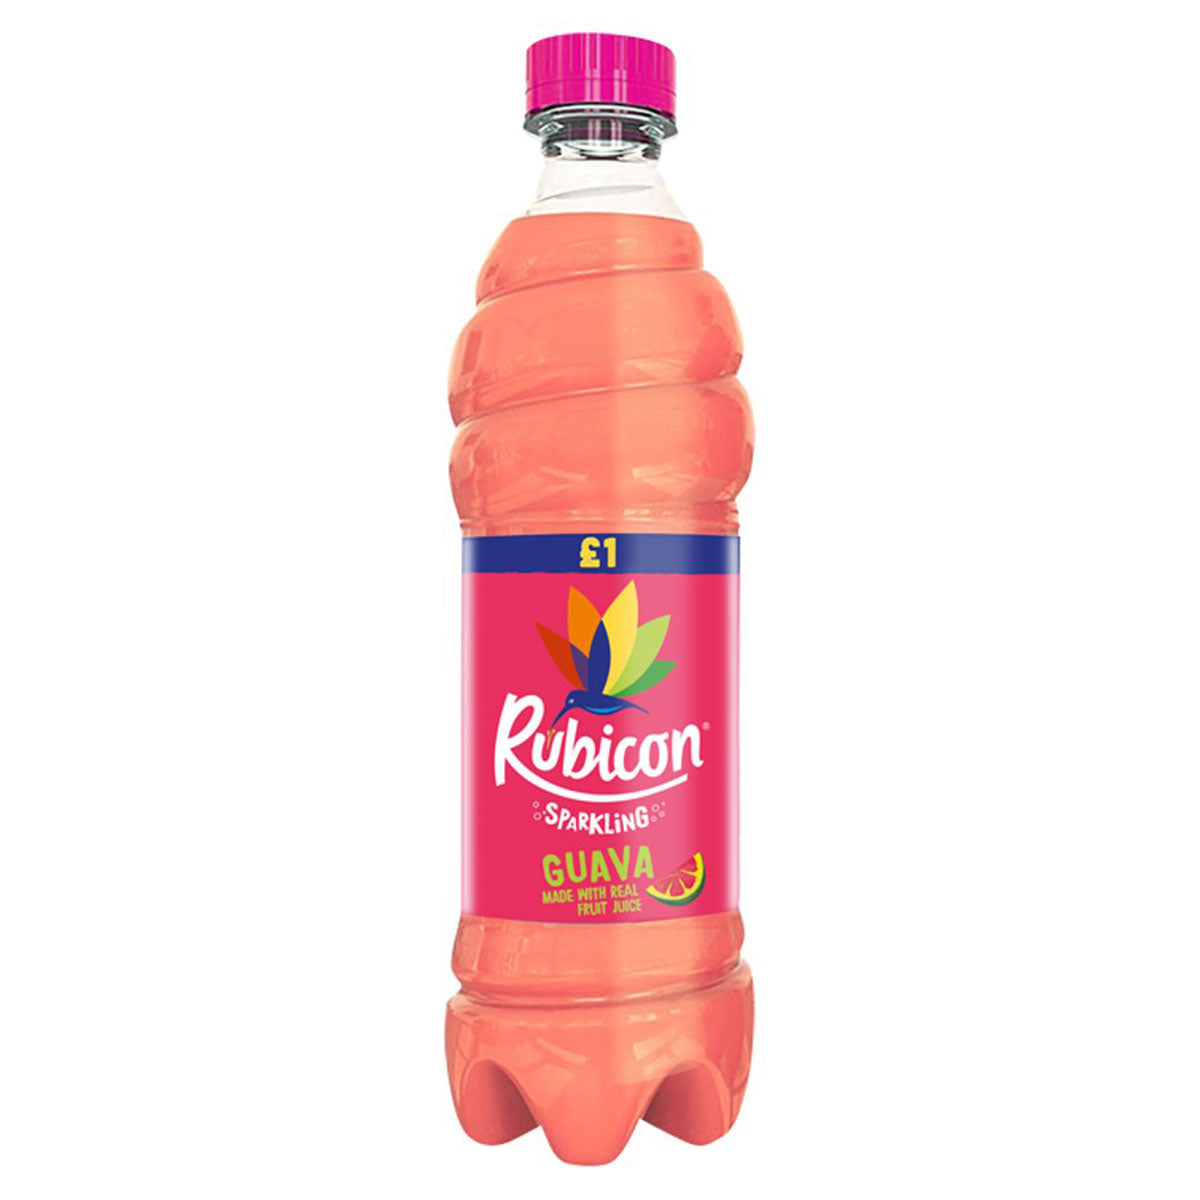 Rubicon - Sparkling Guava Juice Drink - 500ml - Continental Food Store